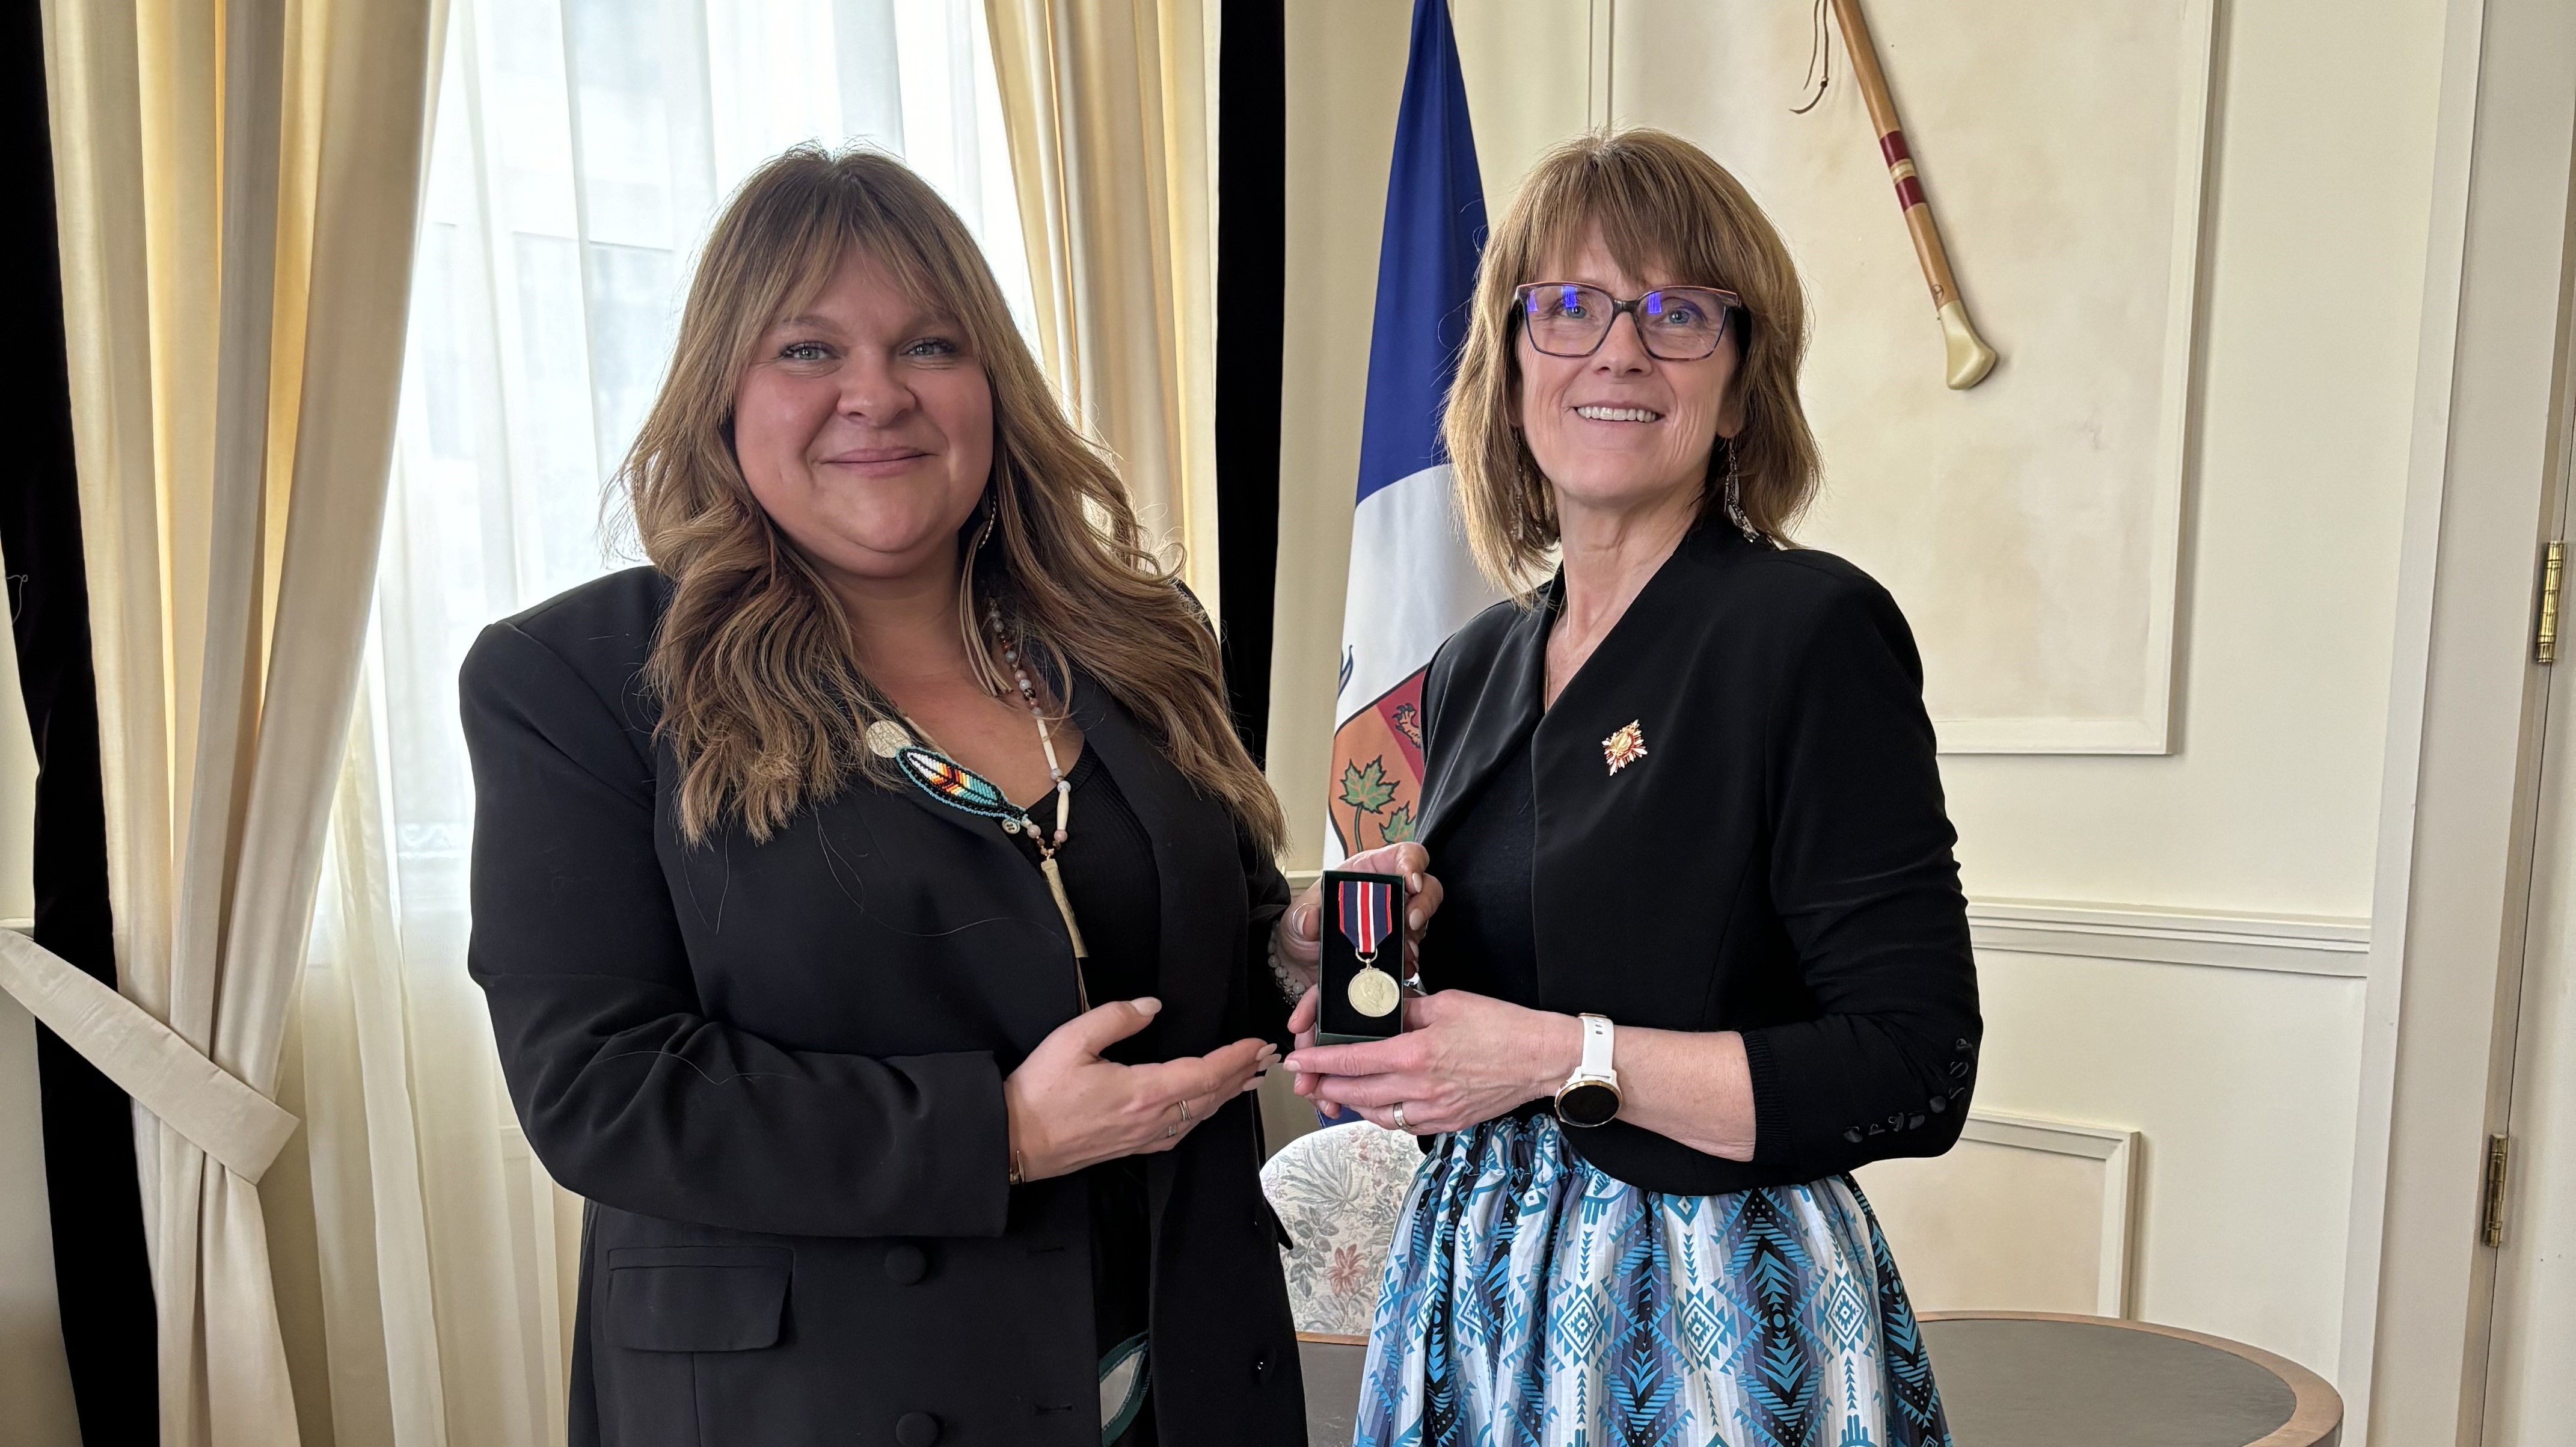 The Lieutenant Governor of Quebec, Manon Jeannotte, honored with the Coronation Medal of King Charles III

